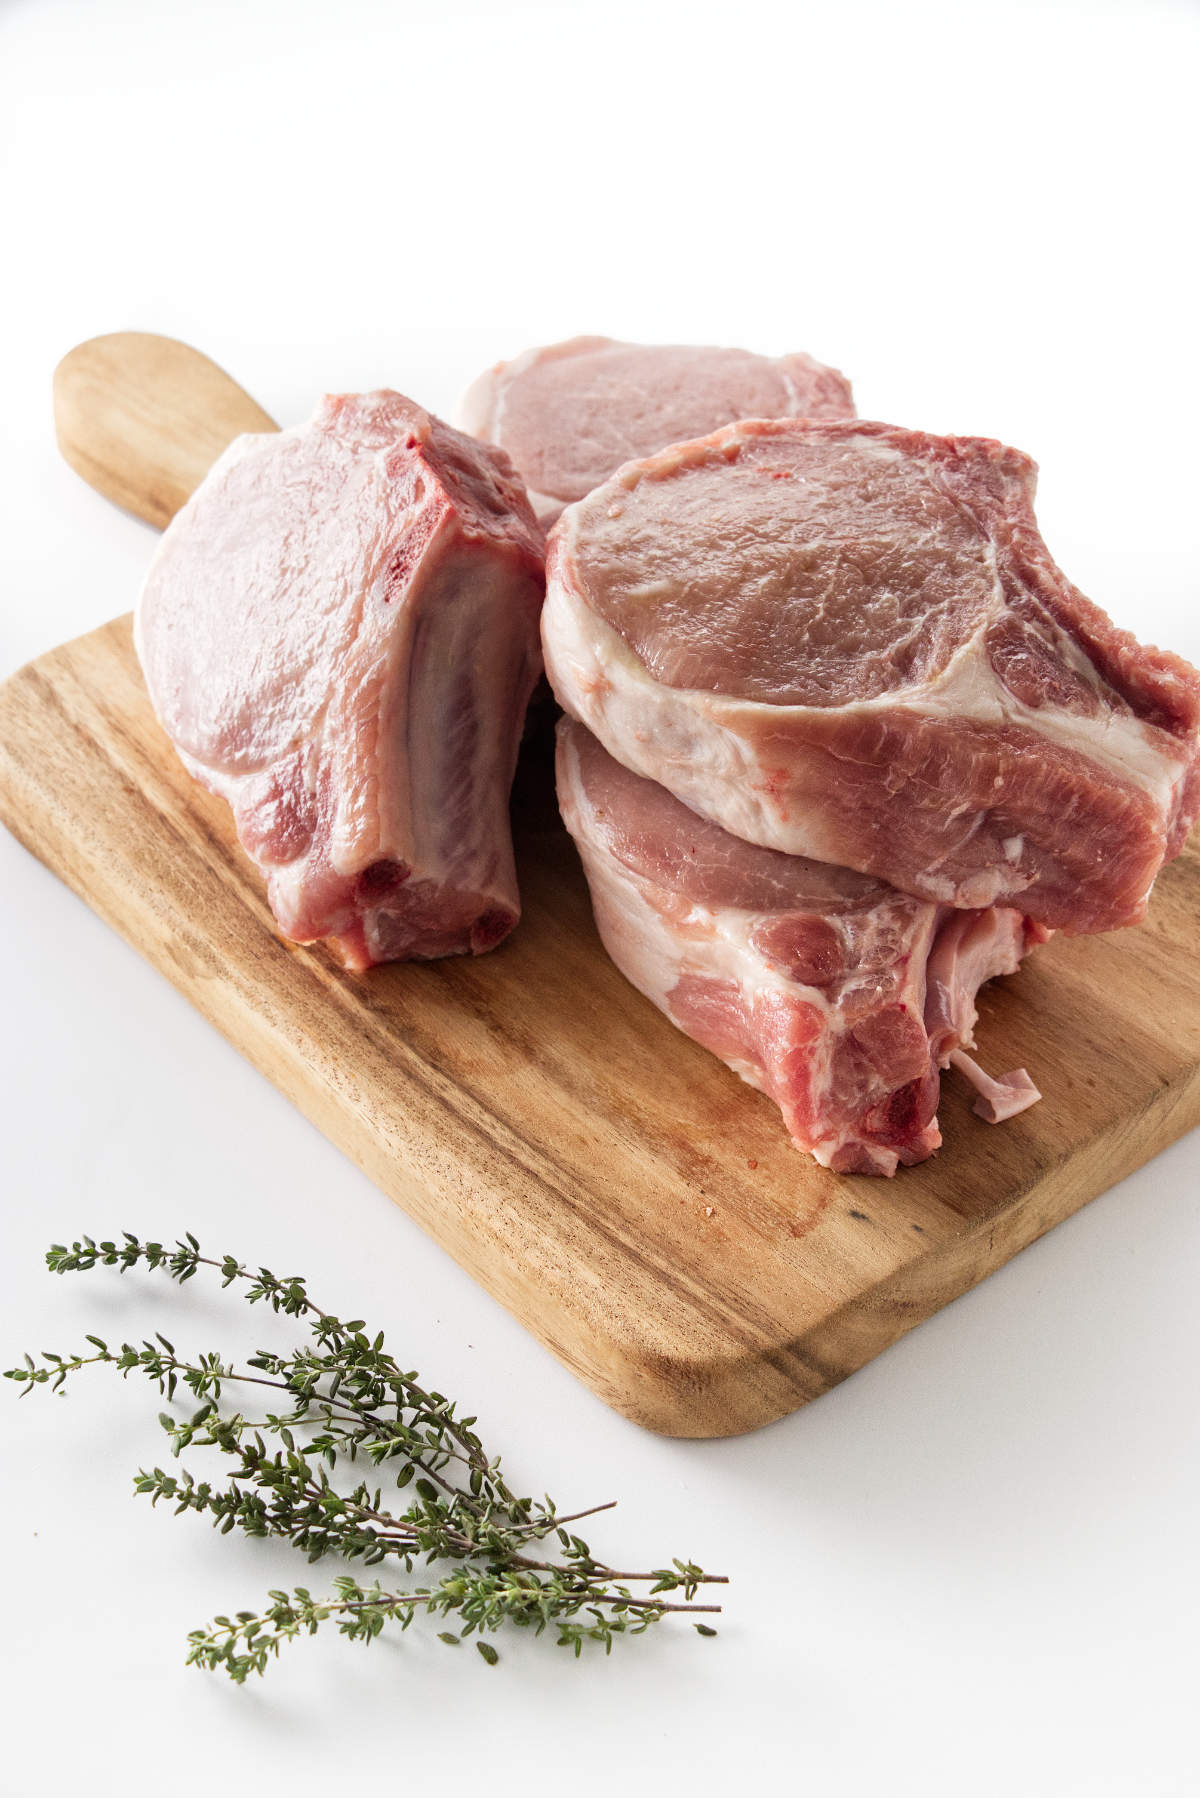 Four raw pork chops on a wooden cutting board, fresh thyme in the foreground